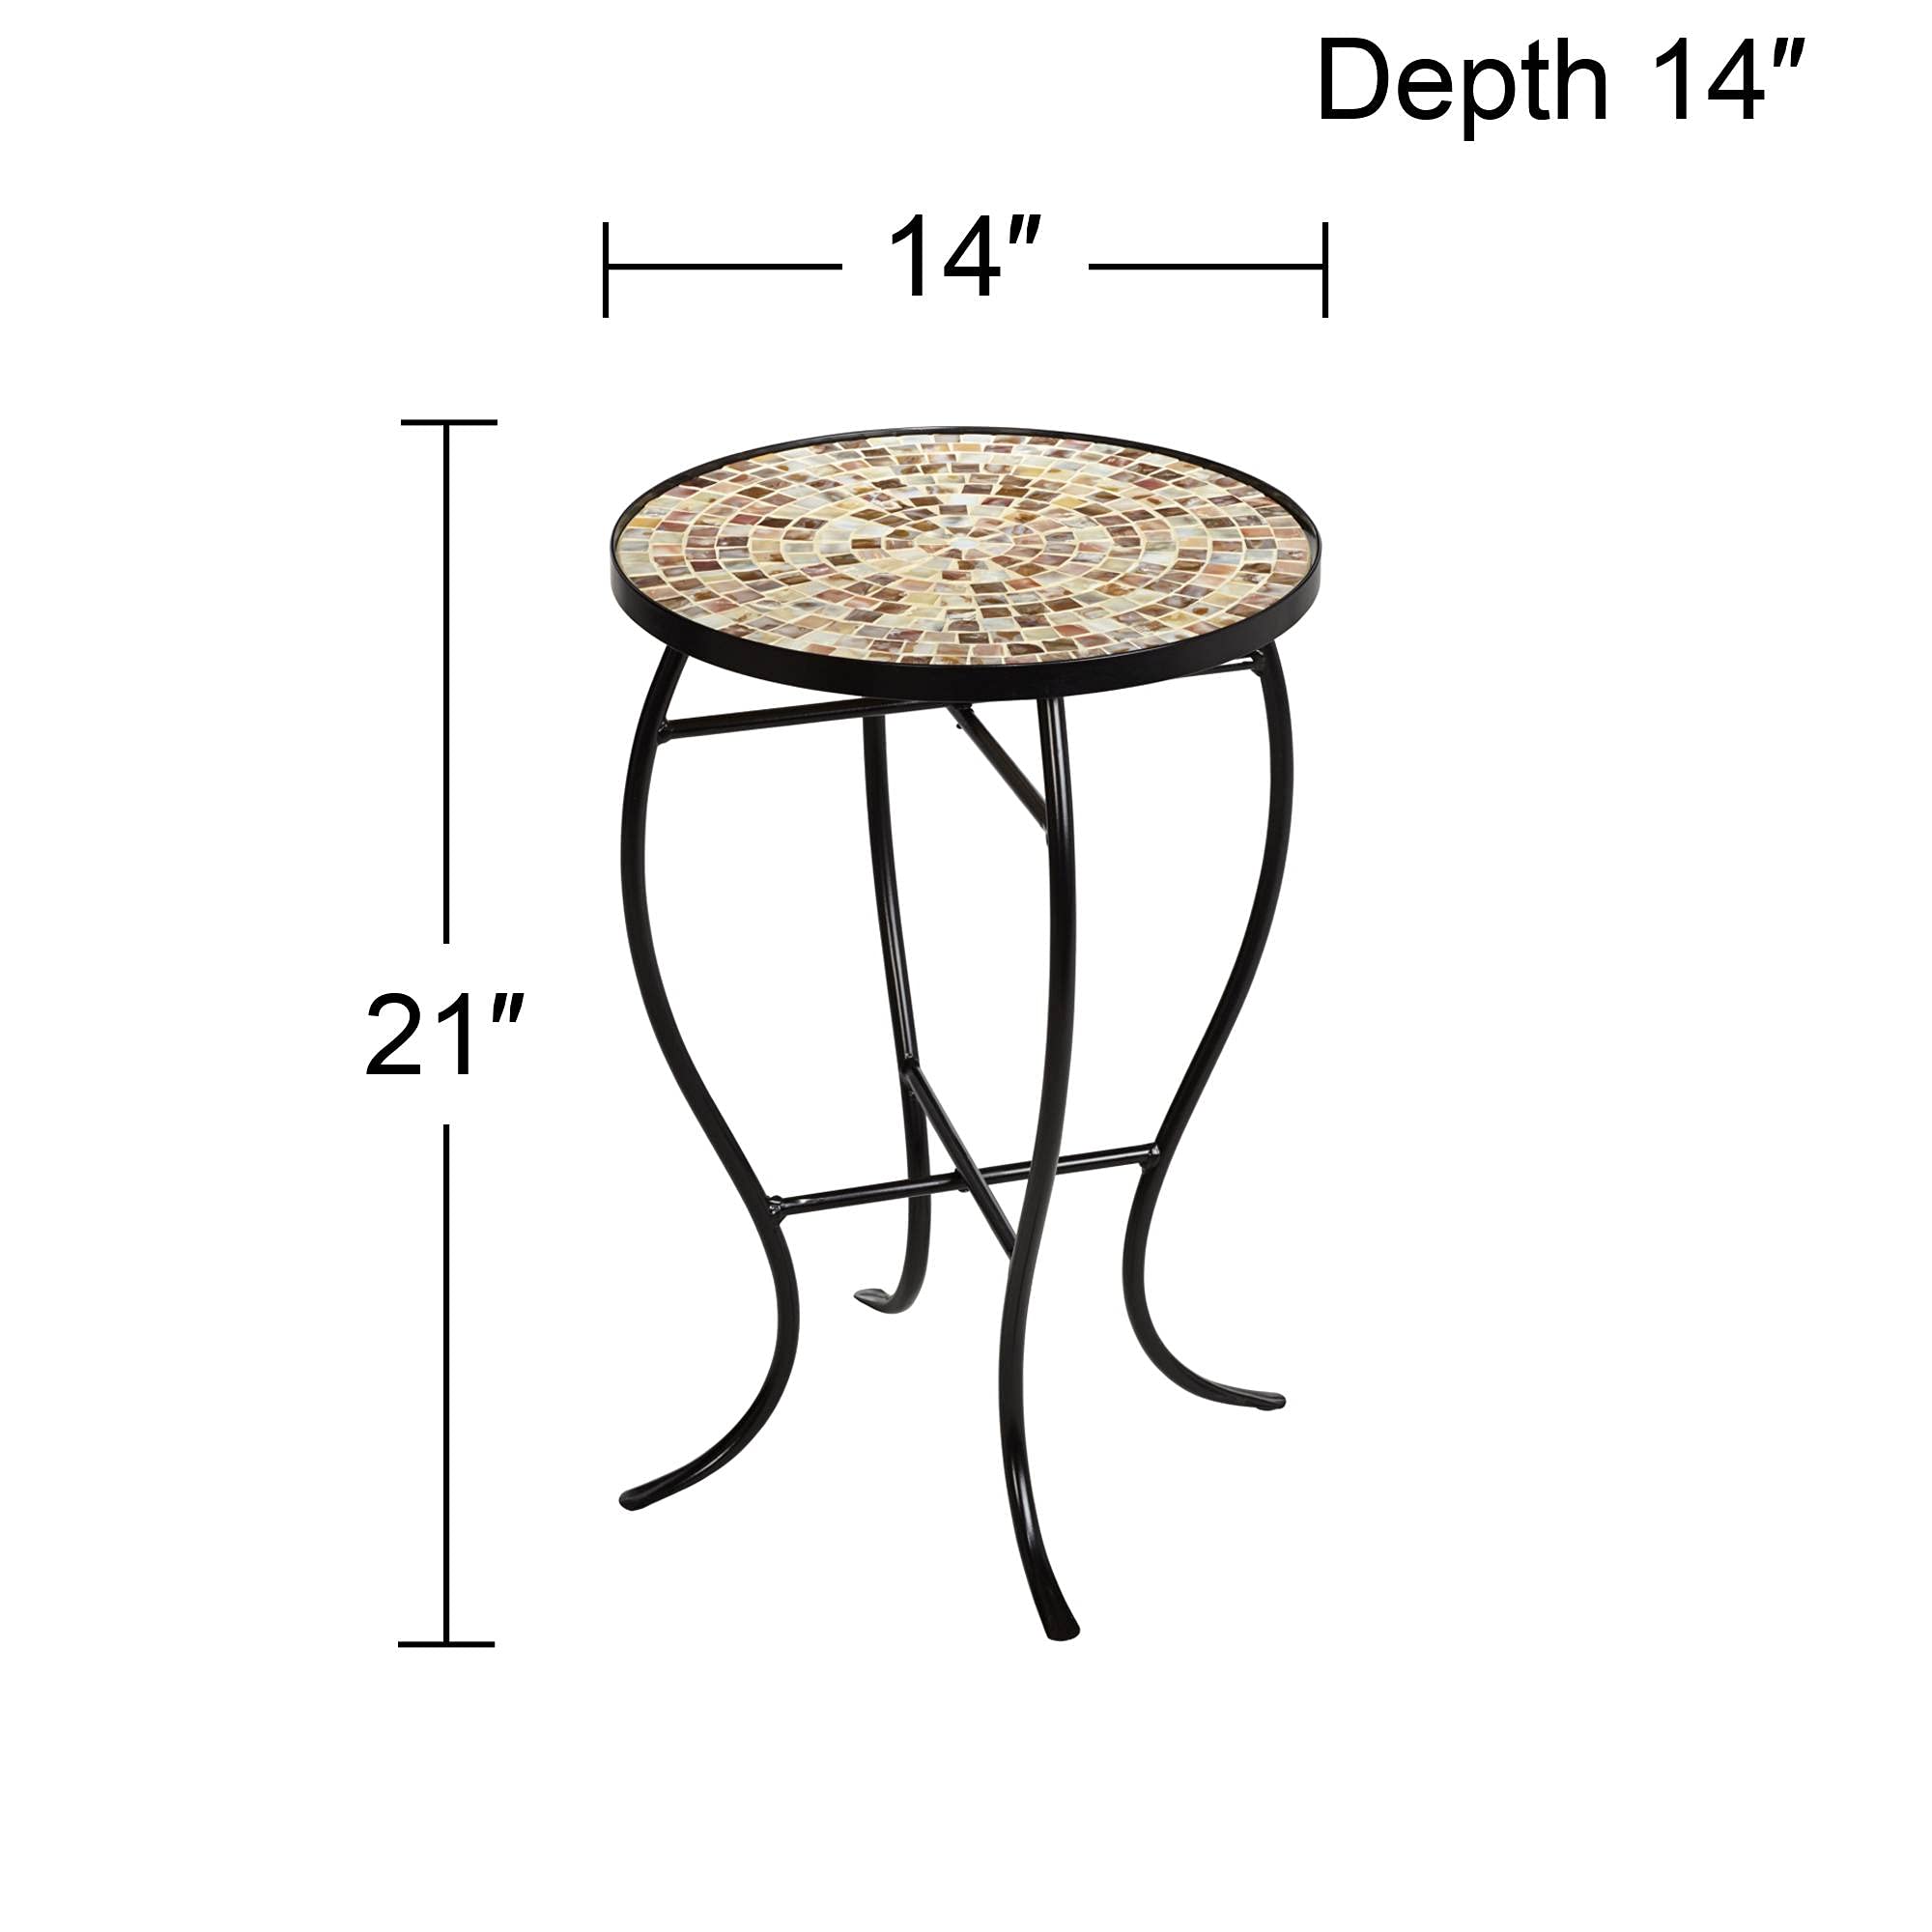 Teal Island Designs Mother of Pearl Modern Black Metal Round Outdoor Accent Side Table 14" Wide Natural Mosaic Tile Tabletop Gracefully Curved Legs for Spaces Porch Patio Home House Balcony Deck